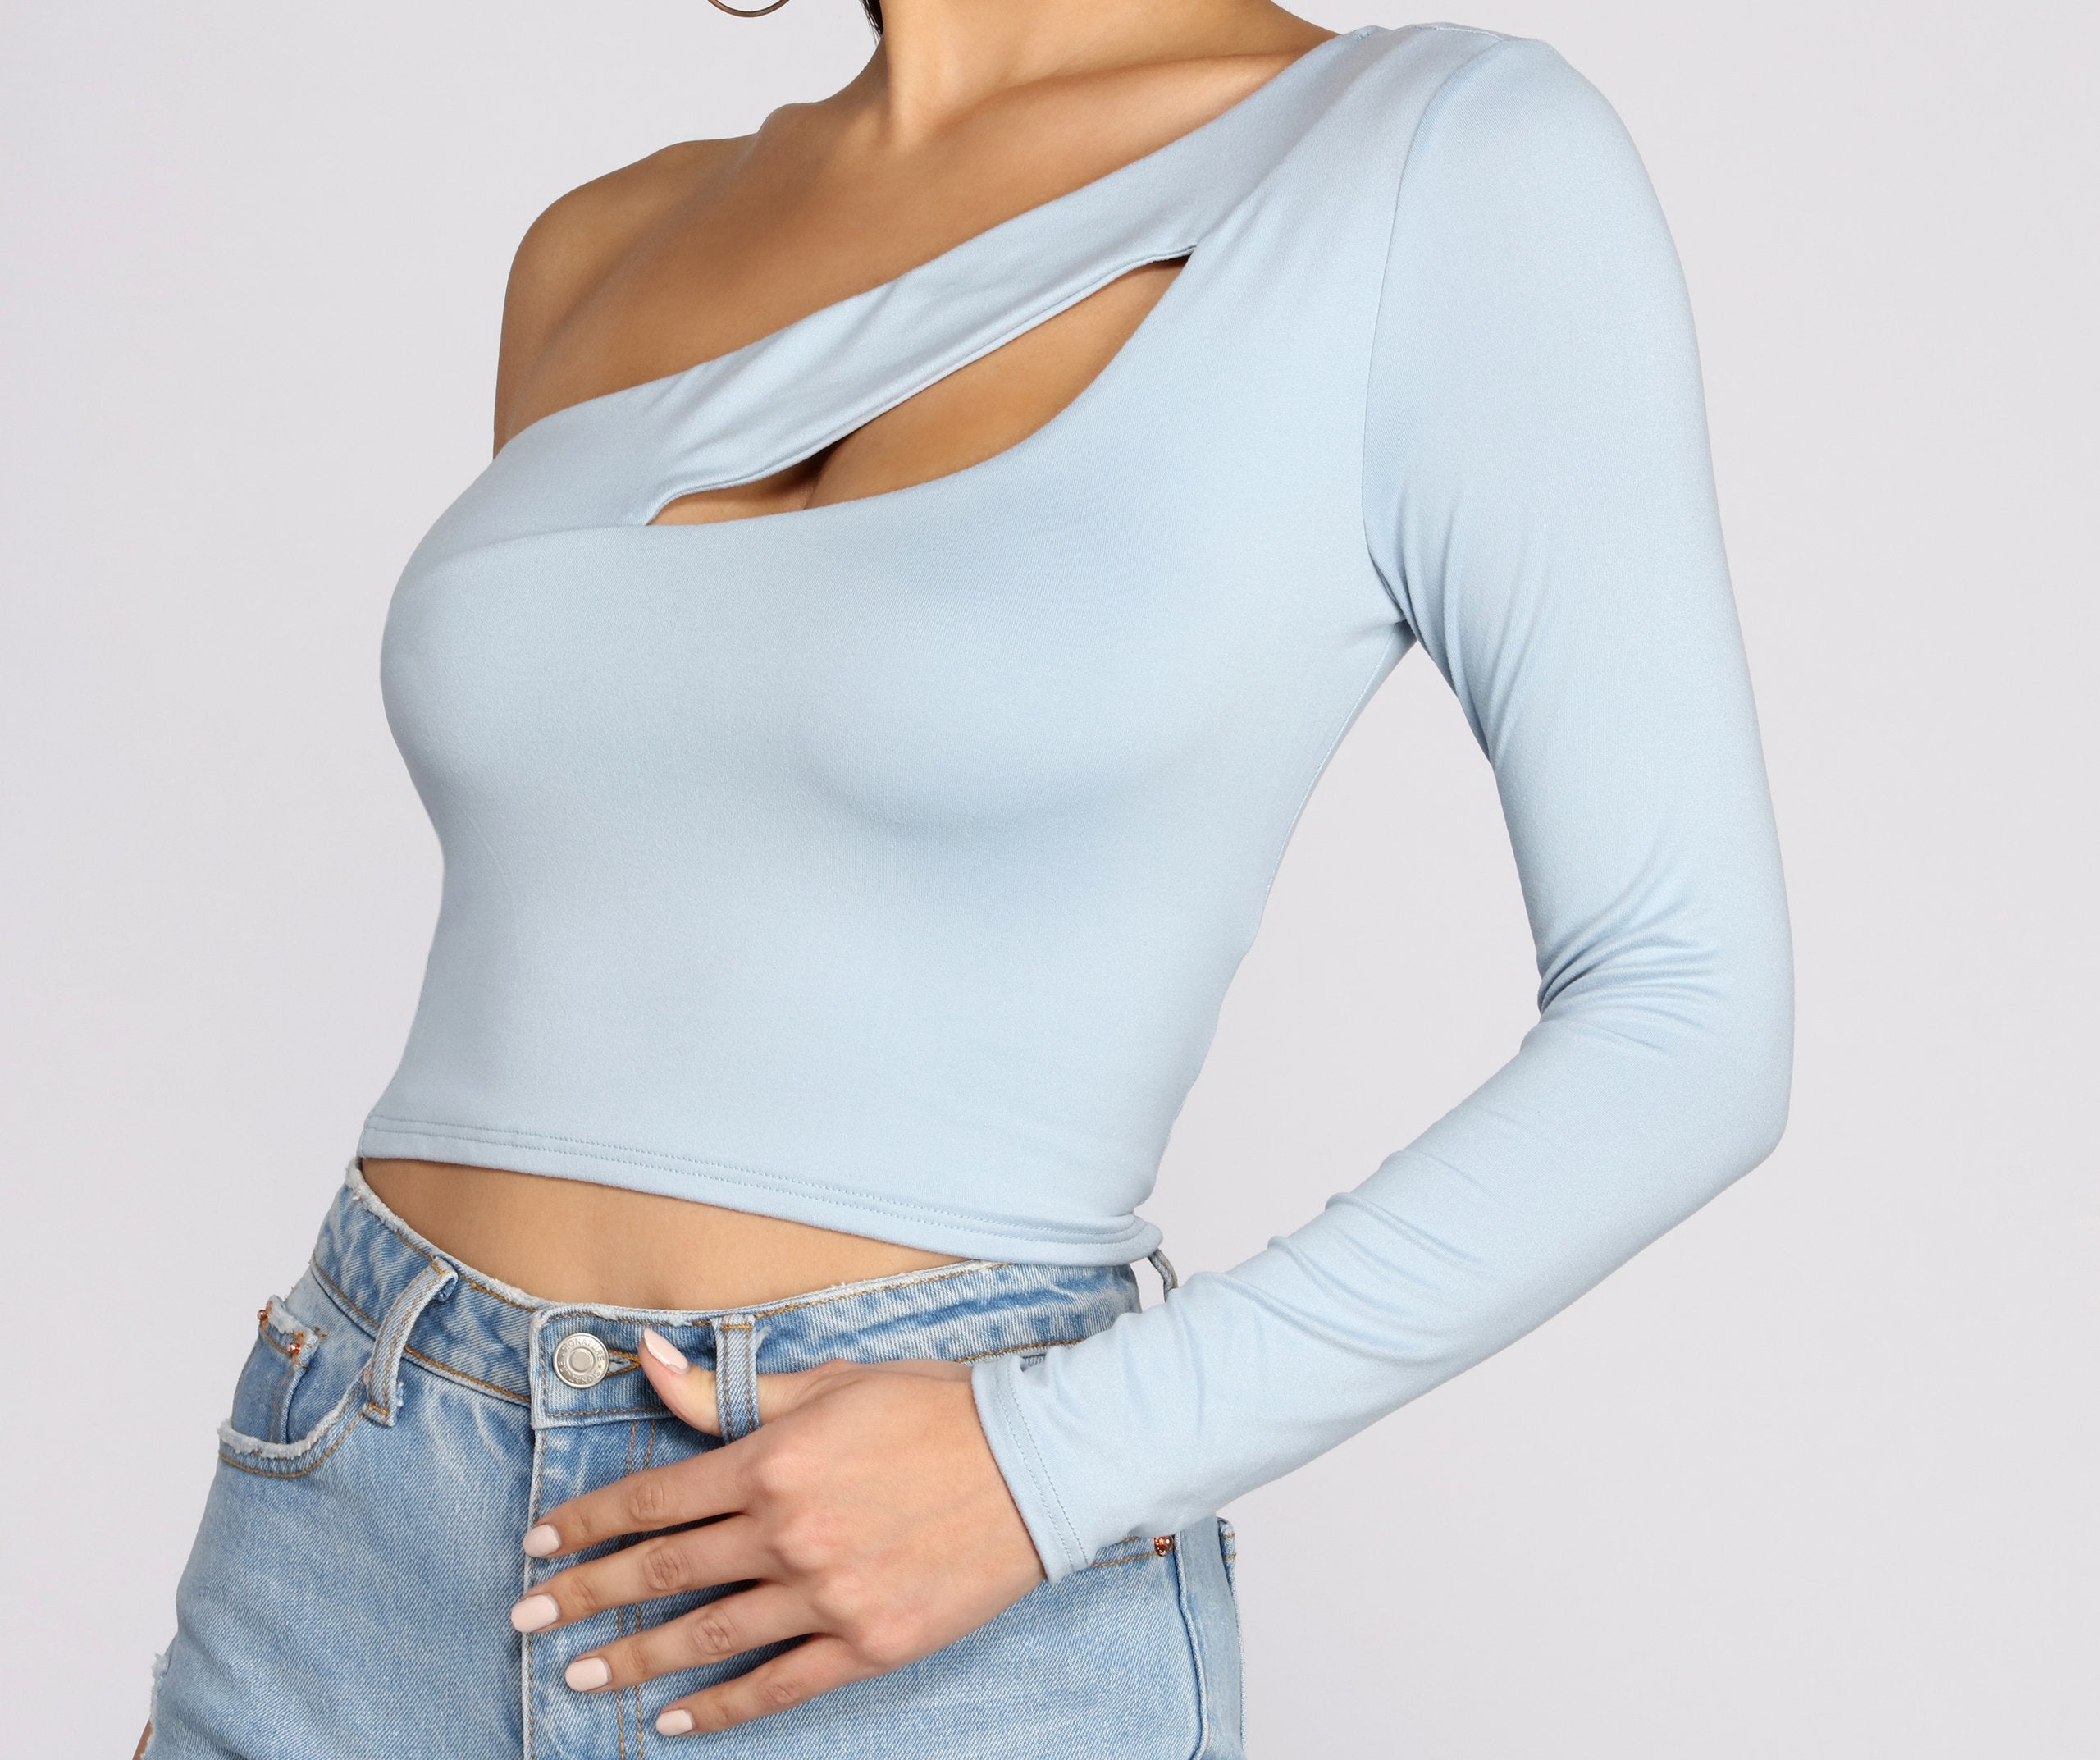 Get Used To Knit Crop Top